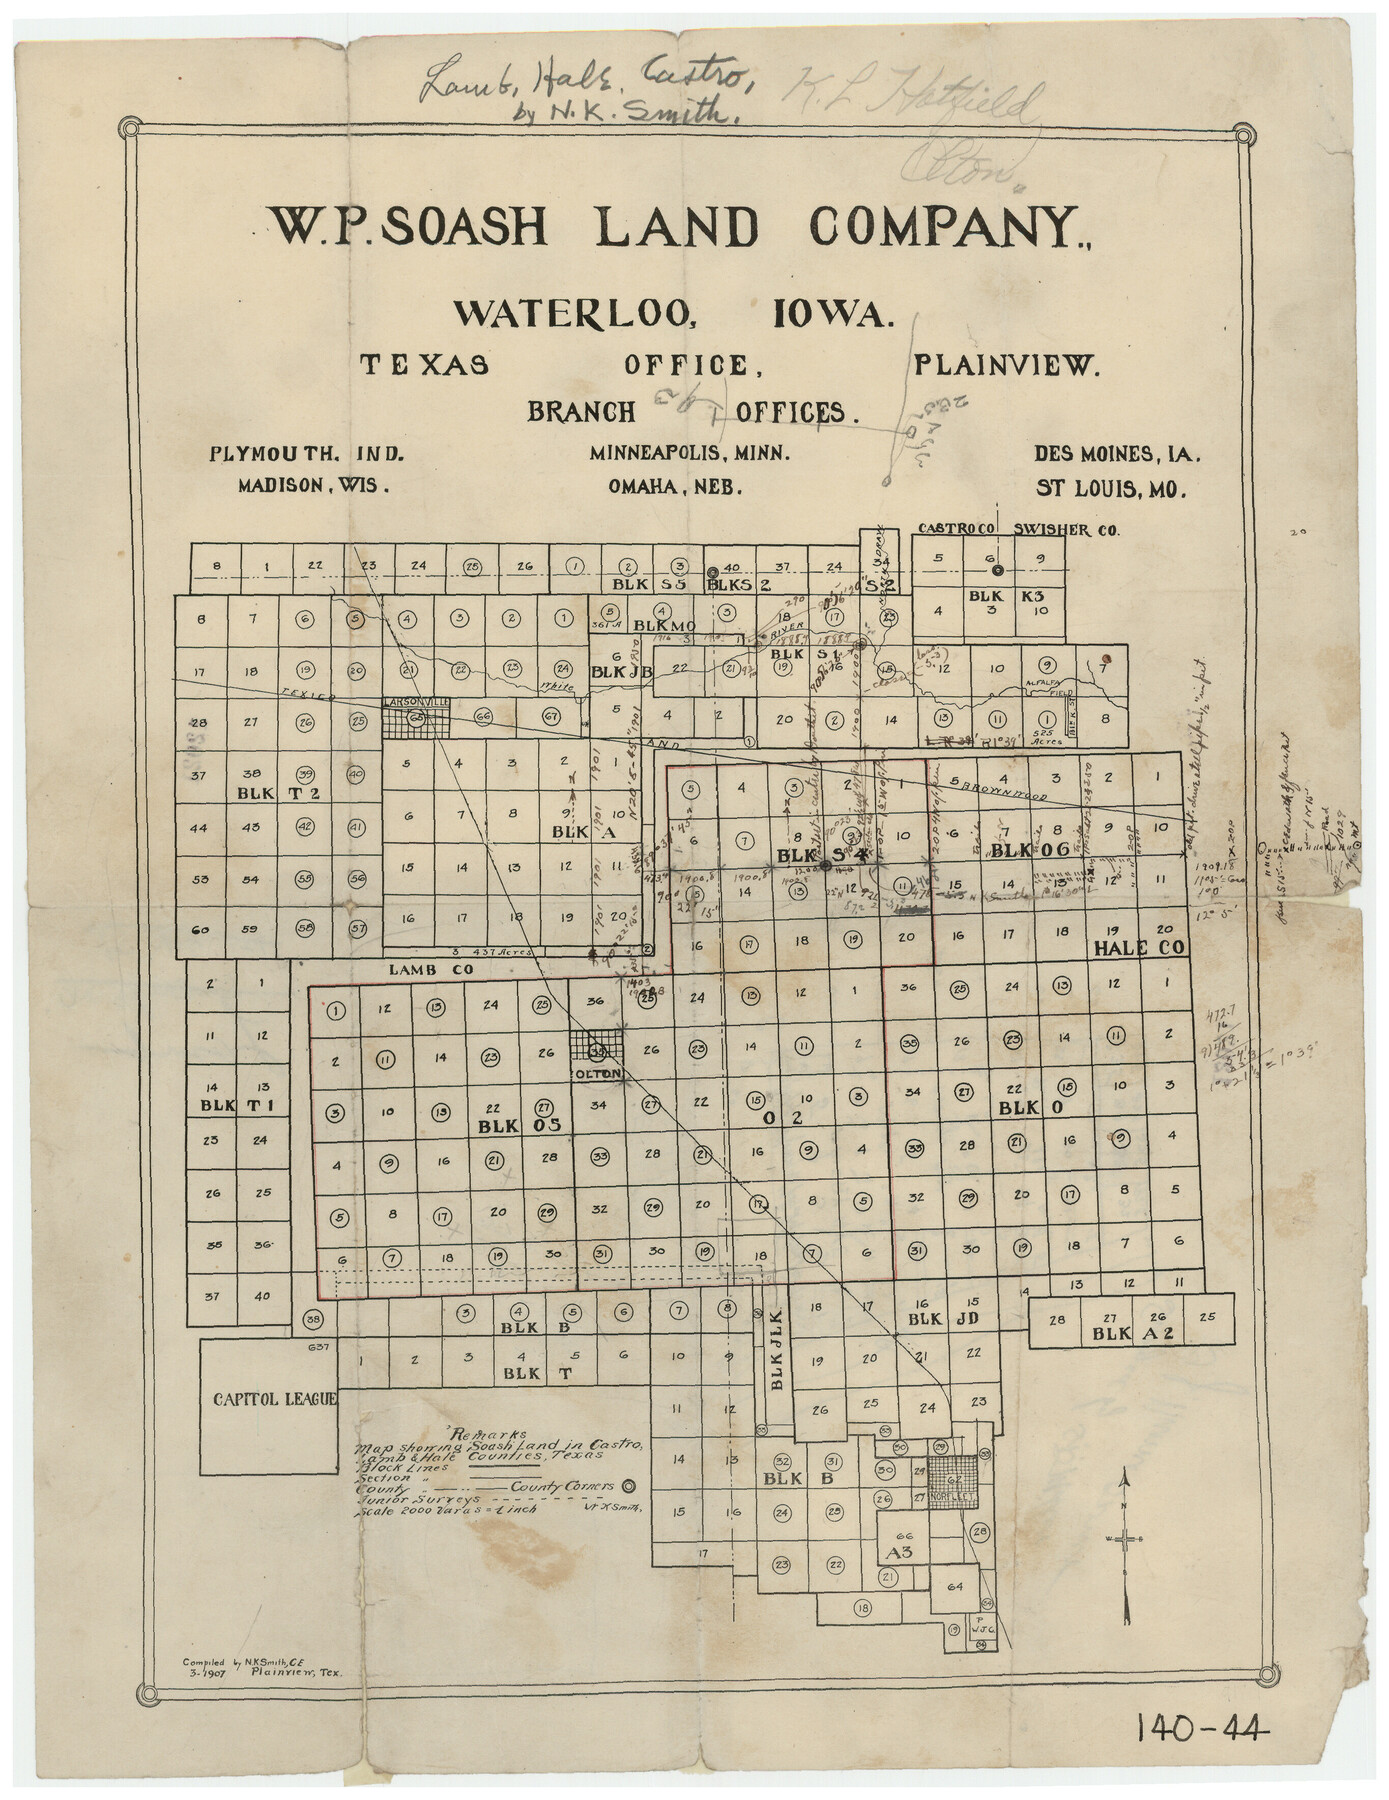 91000, Map Showing Soash Lands in Castro, Lamb, and Hale Counties, Texas, Twichell Survey Records